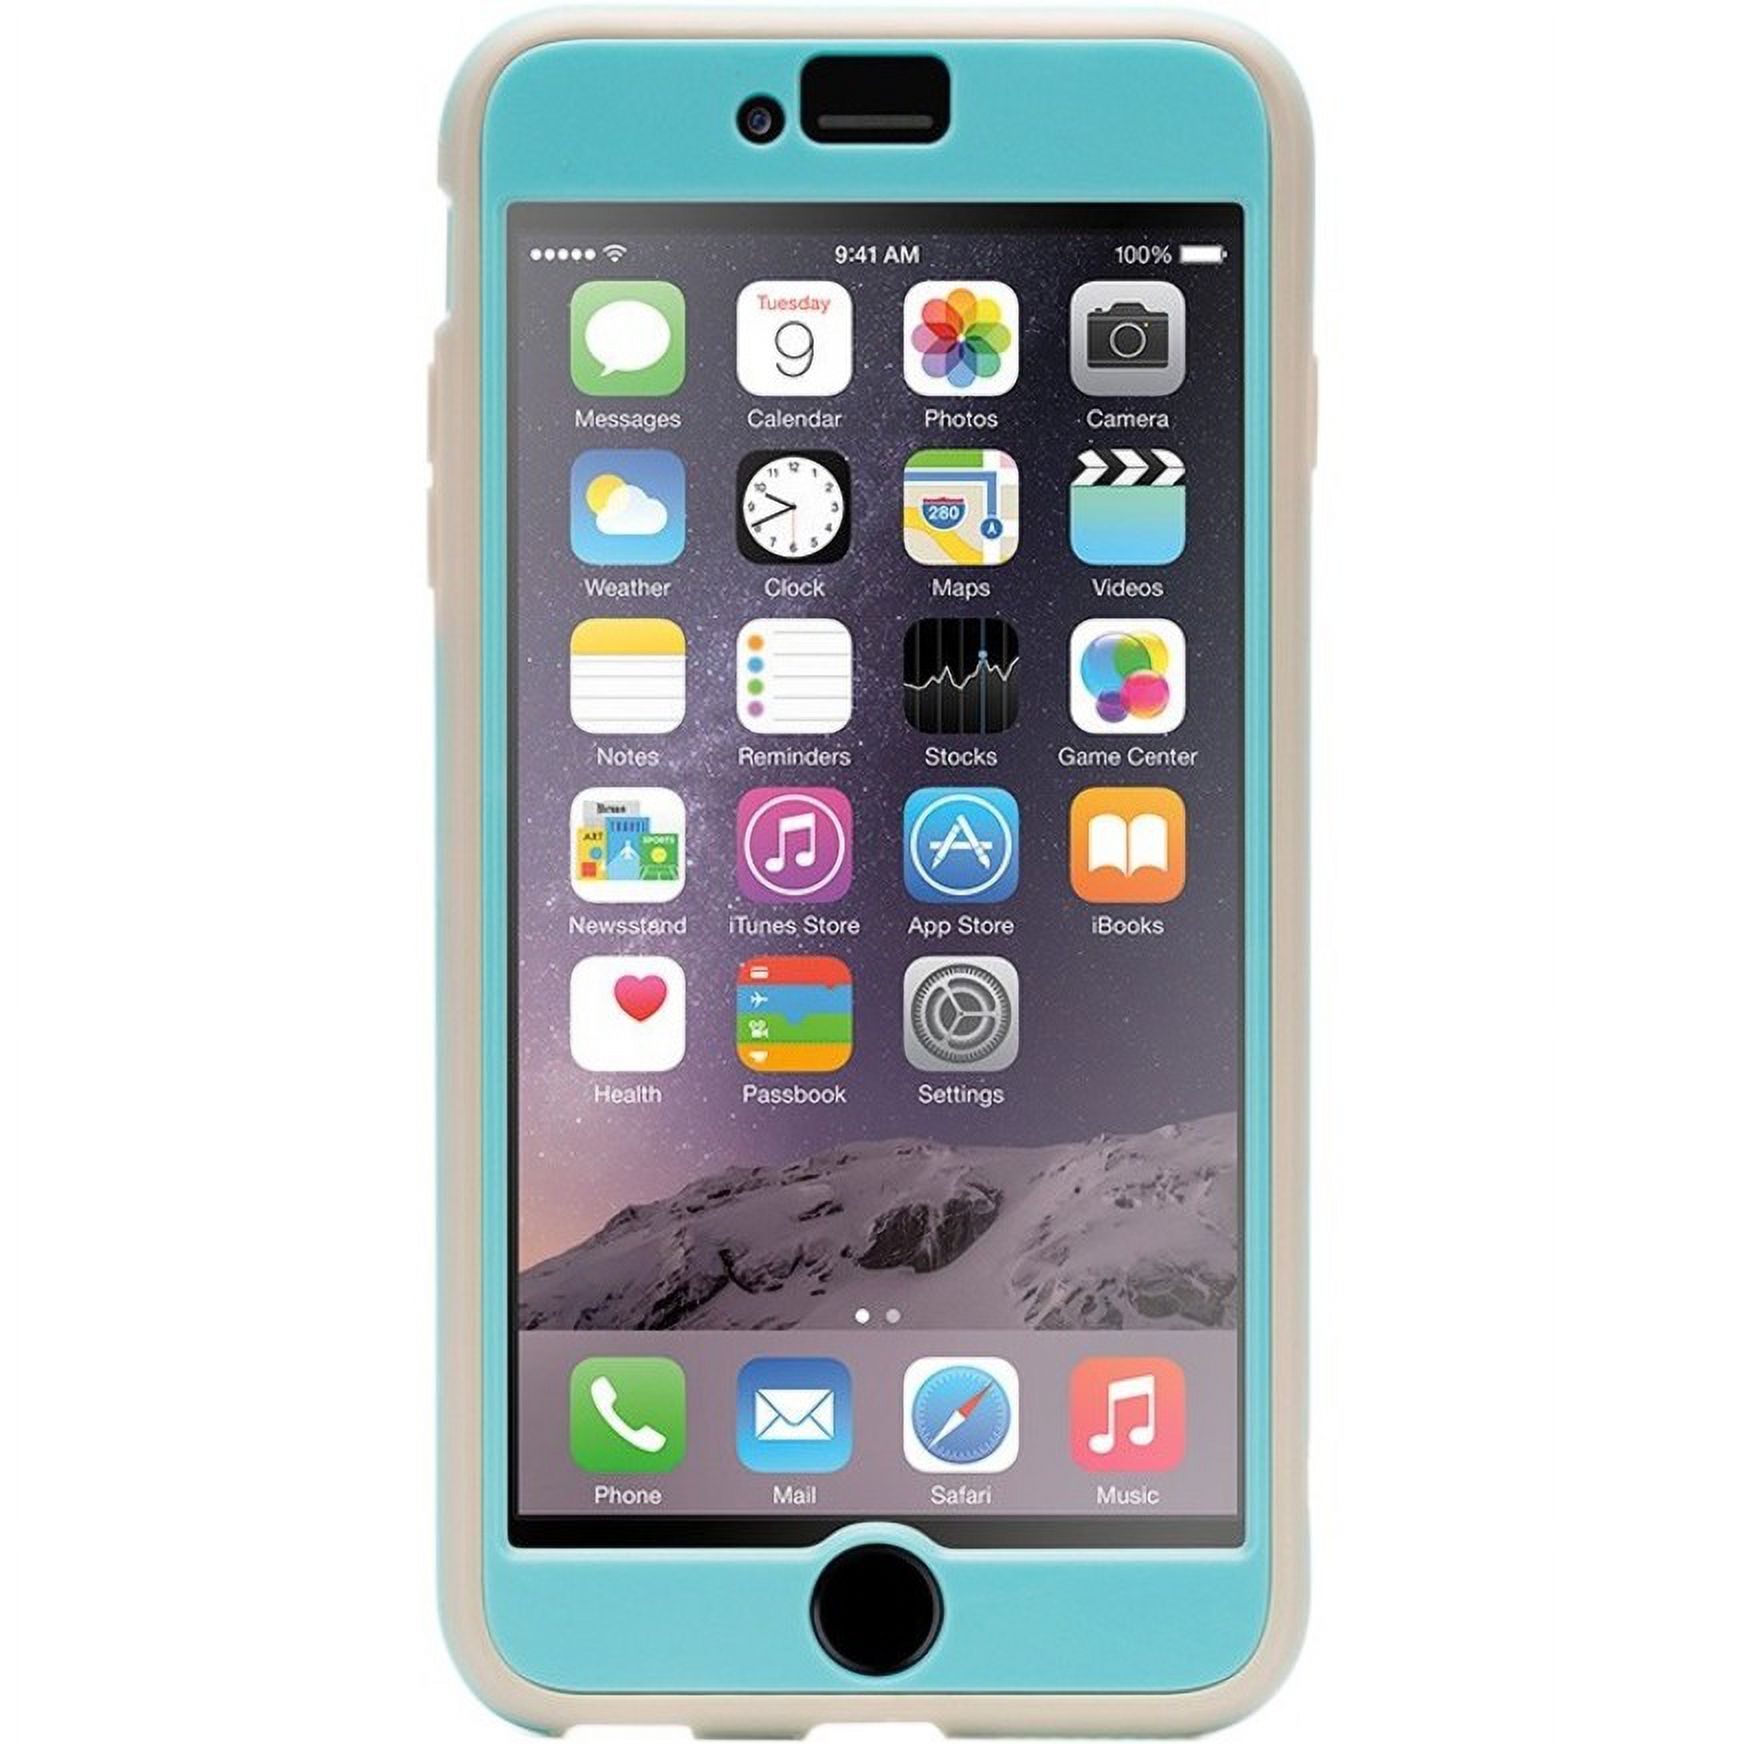 Griffin Identity Ultra Slim Case for Apple iPhone 6 6s Plus 5.5 inch - Turquoise - image 2 of 2